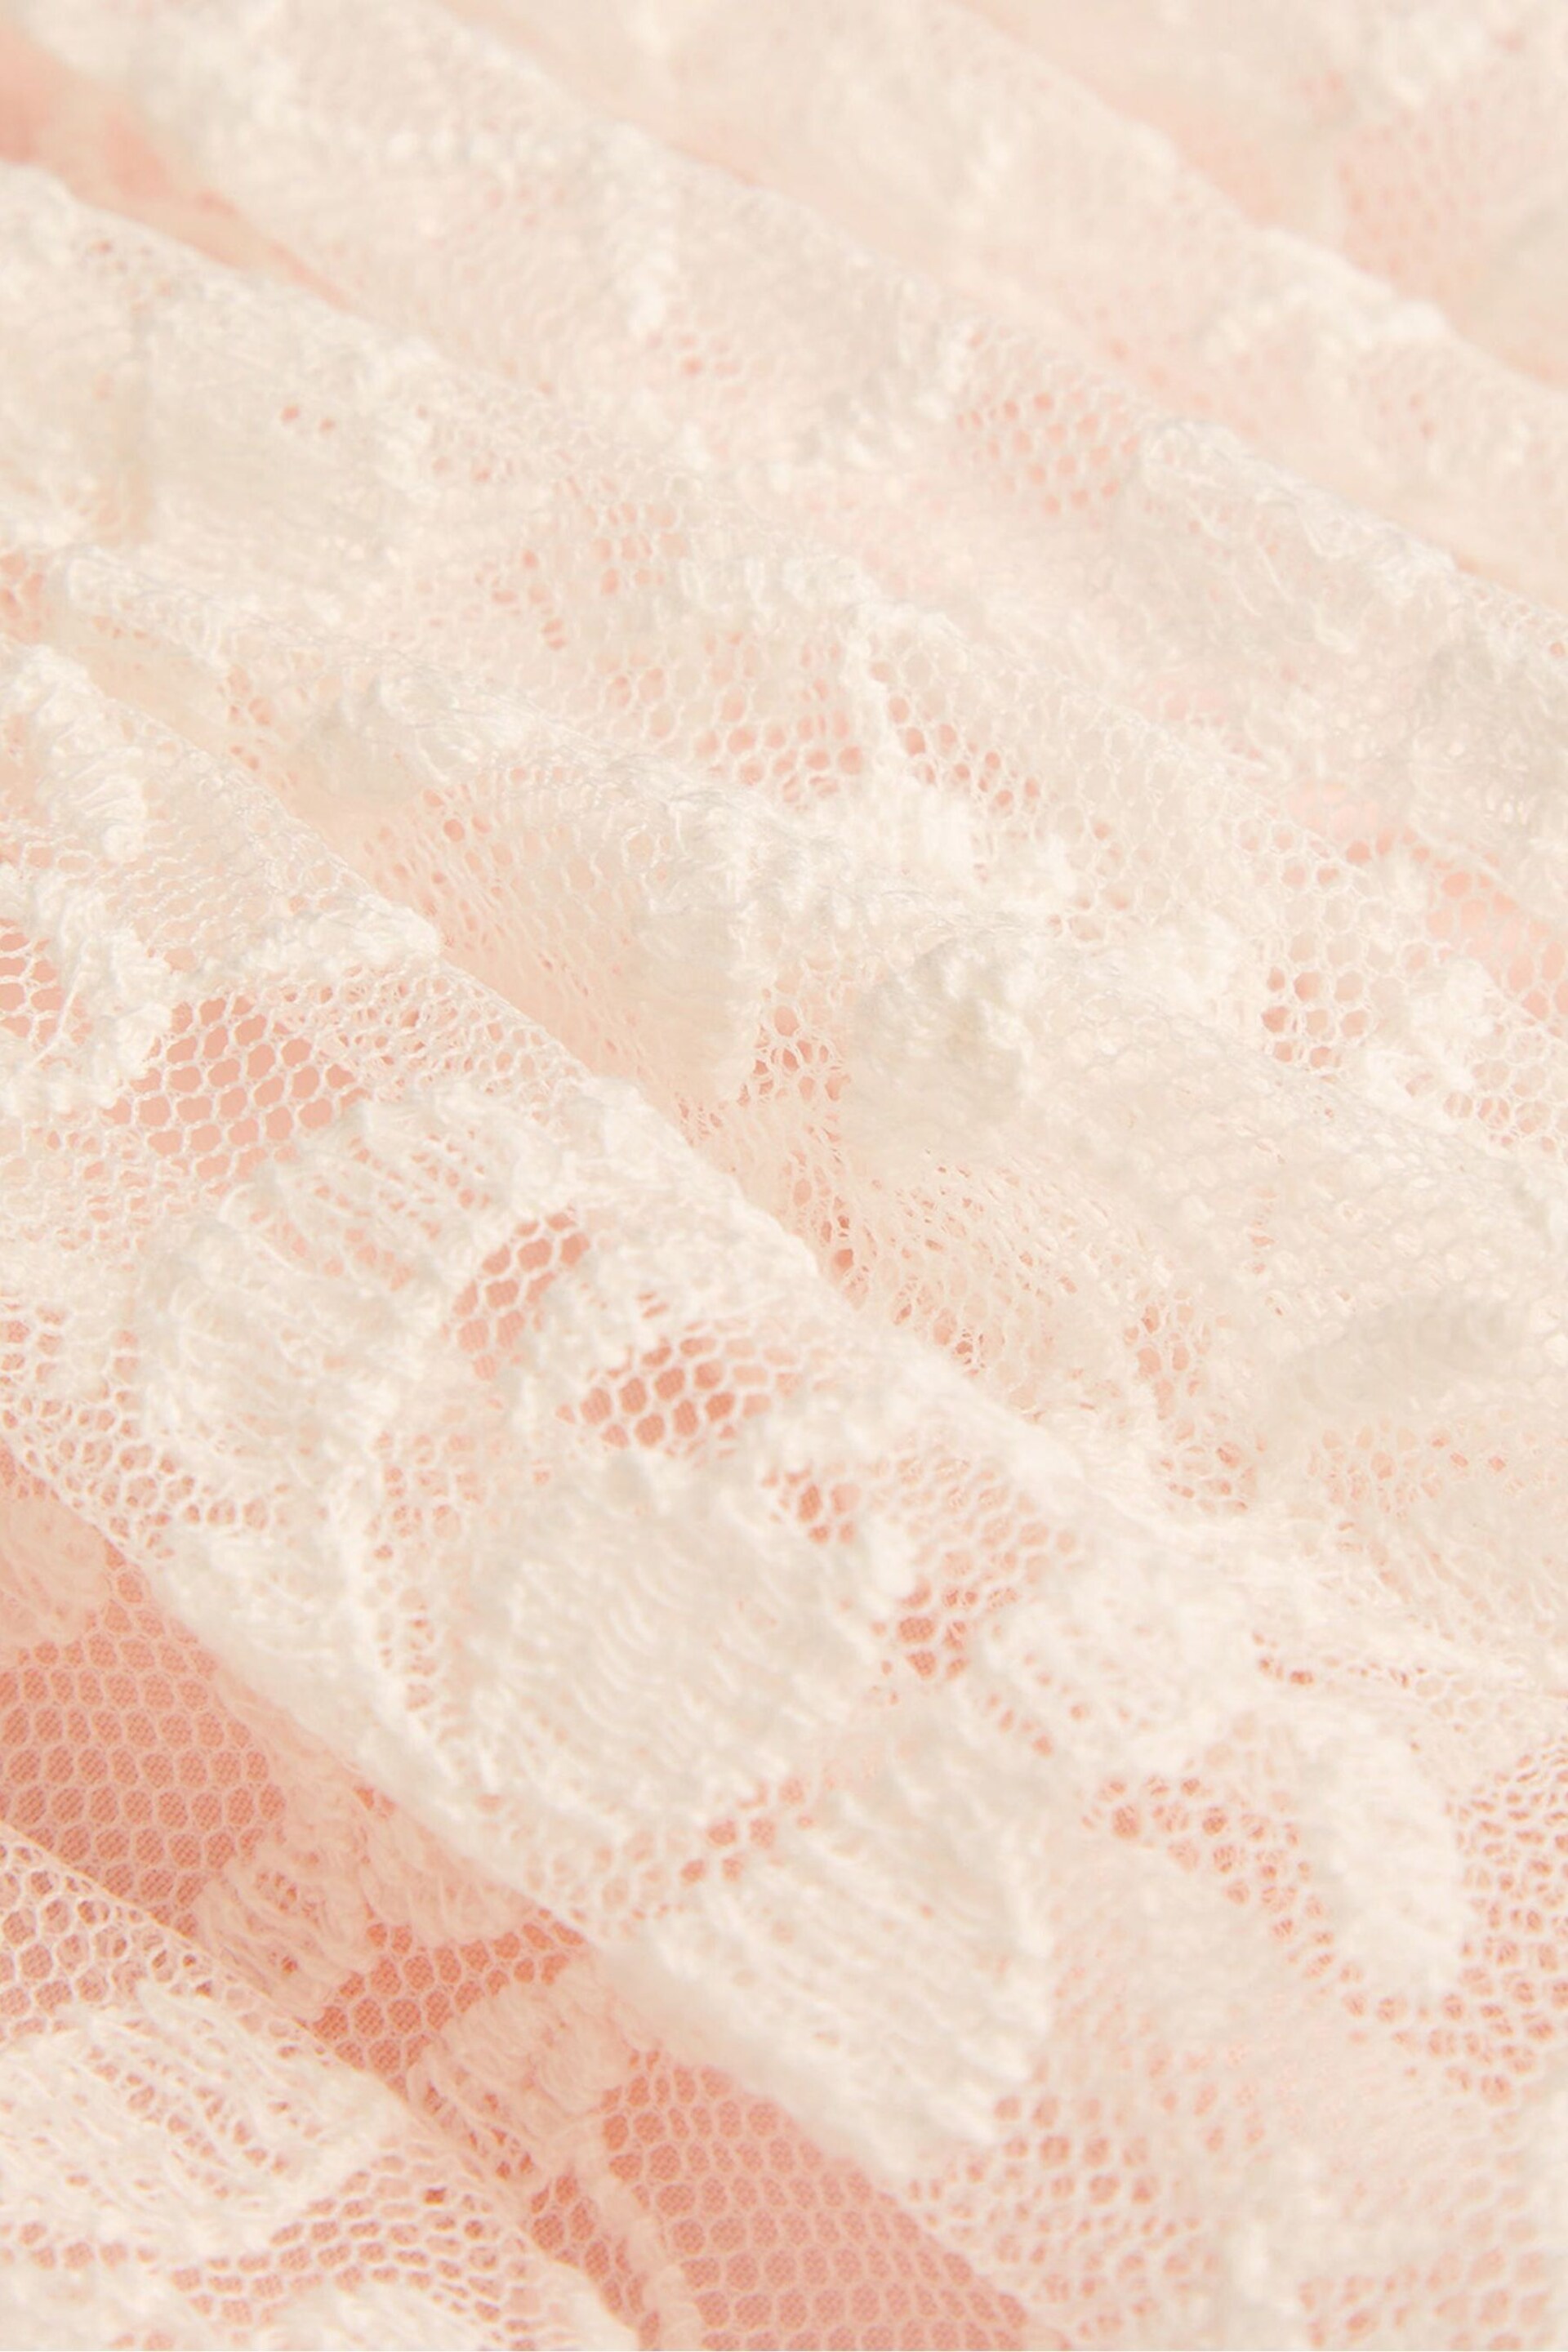 Monsoon Pink Baby Annette Lace Dress - Image 3 of 3